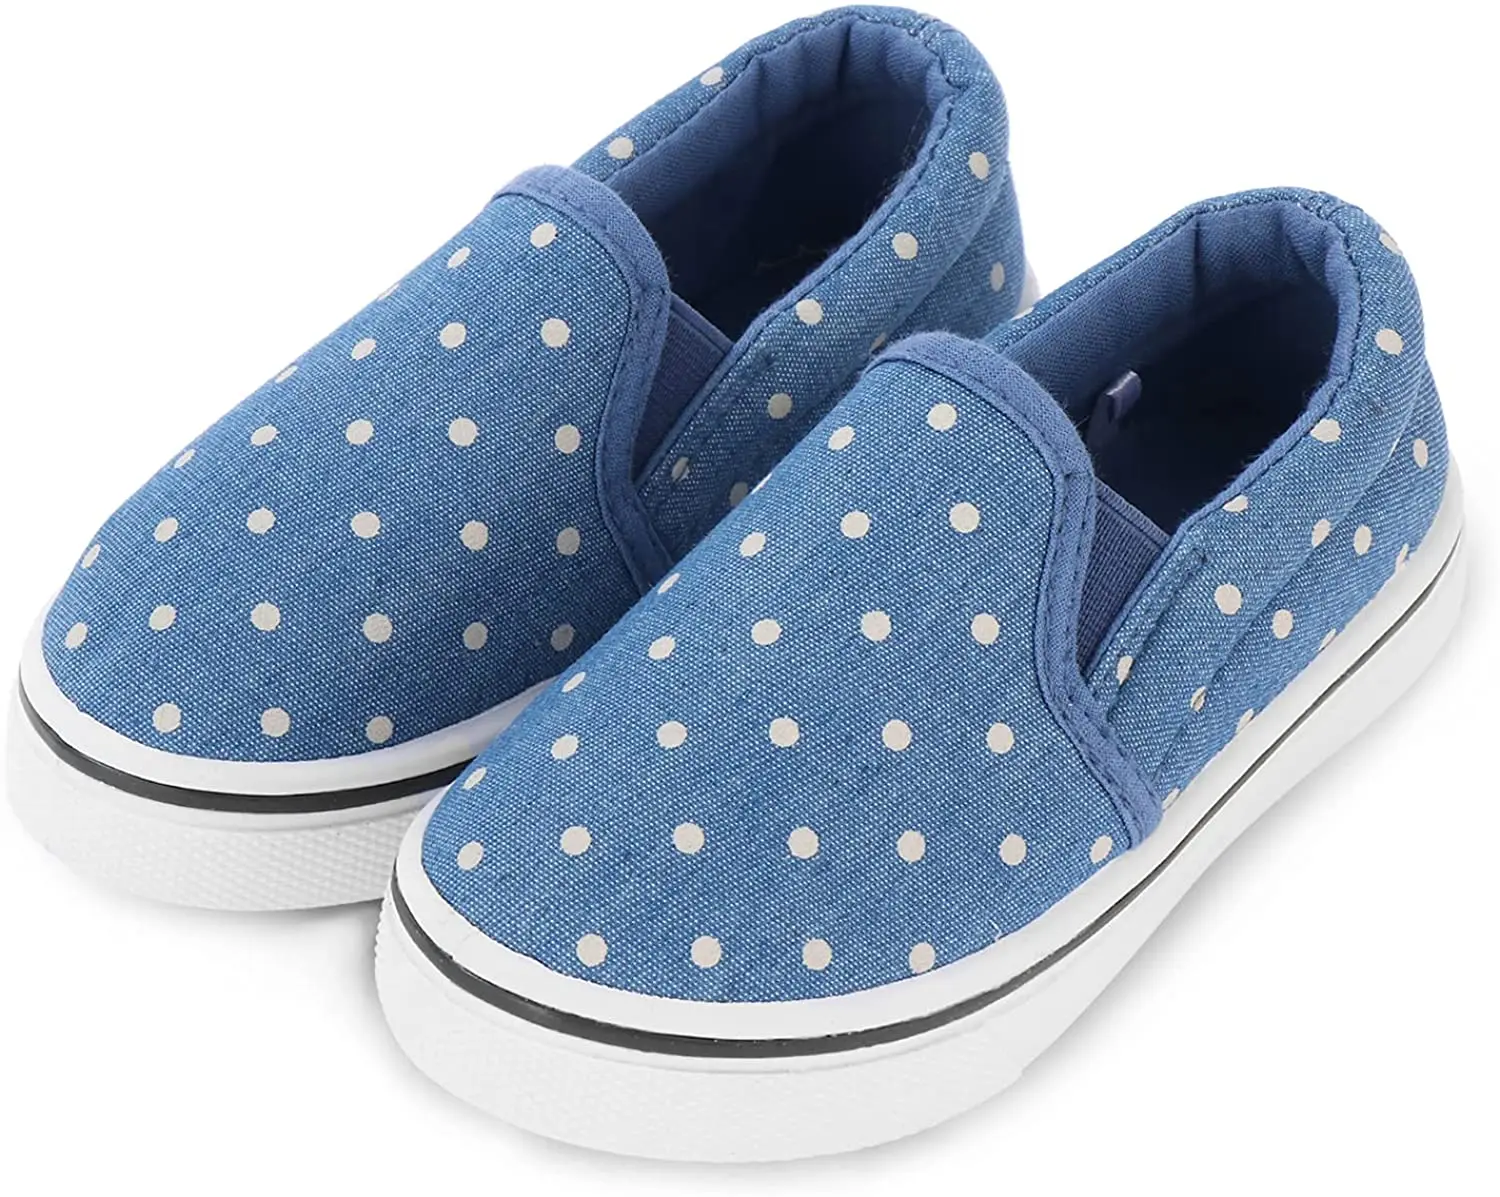 High Quality Kids Shoes for Girls Boys Fashion Casual Toddler Canvas Sneakers